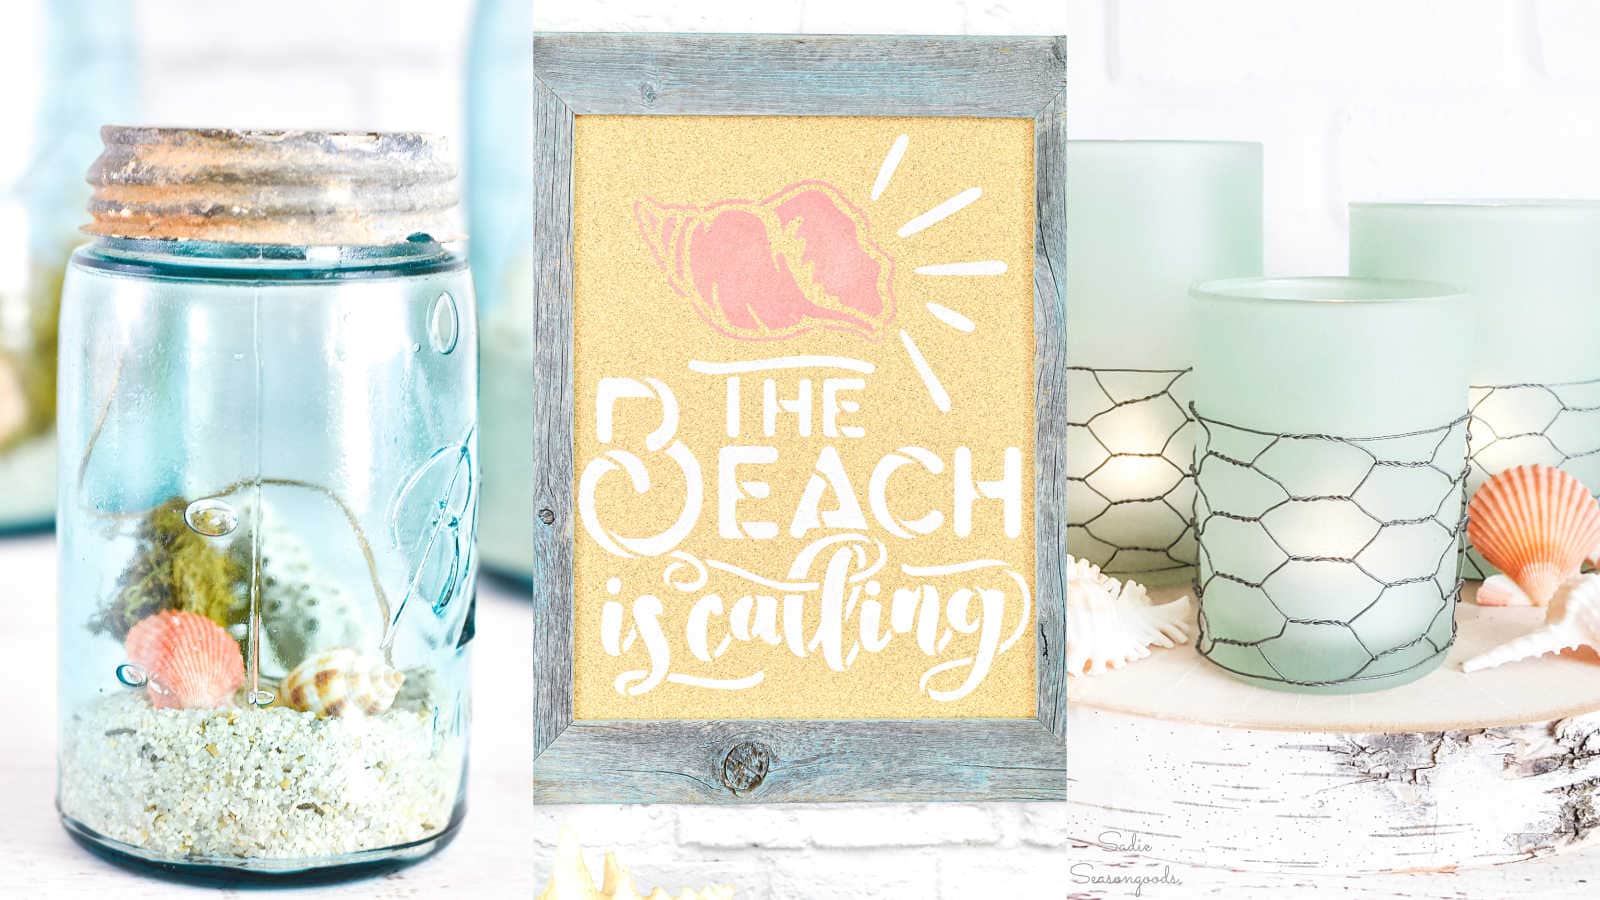 Beachy Decor from the Thrift Store